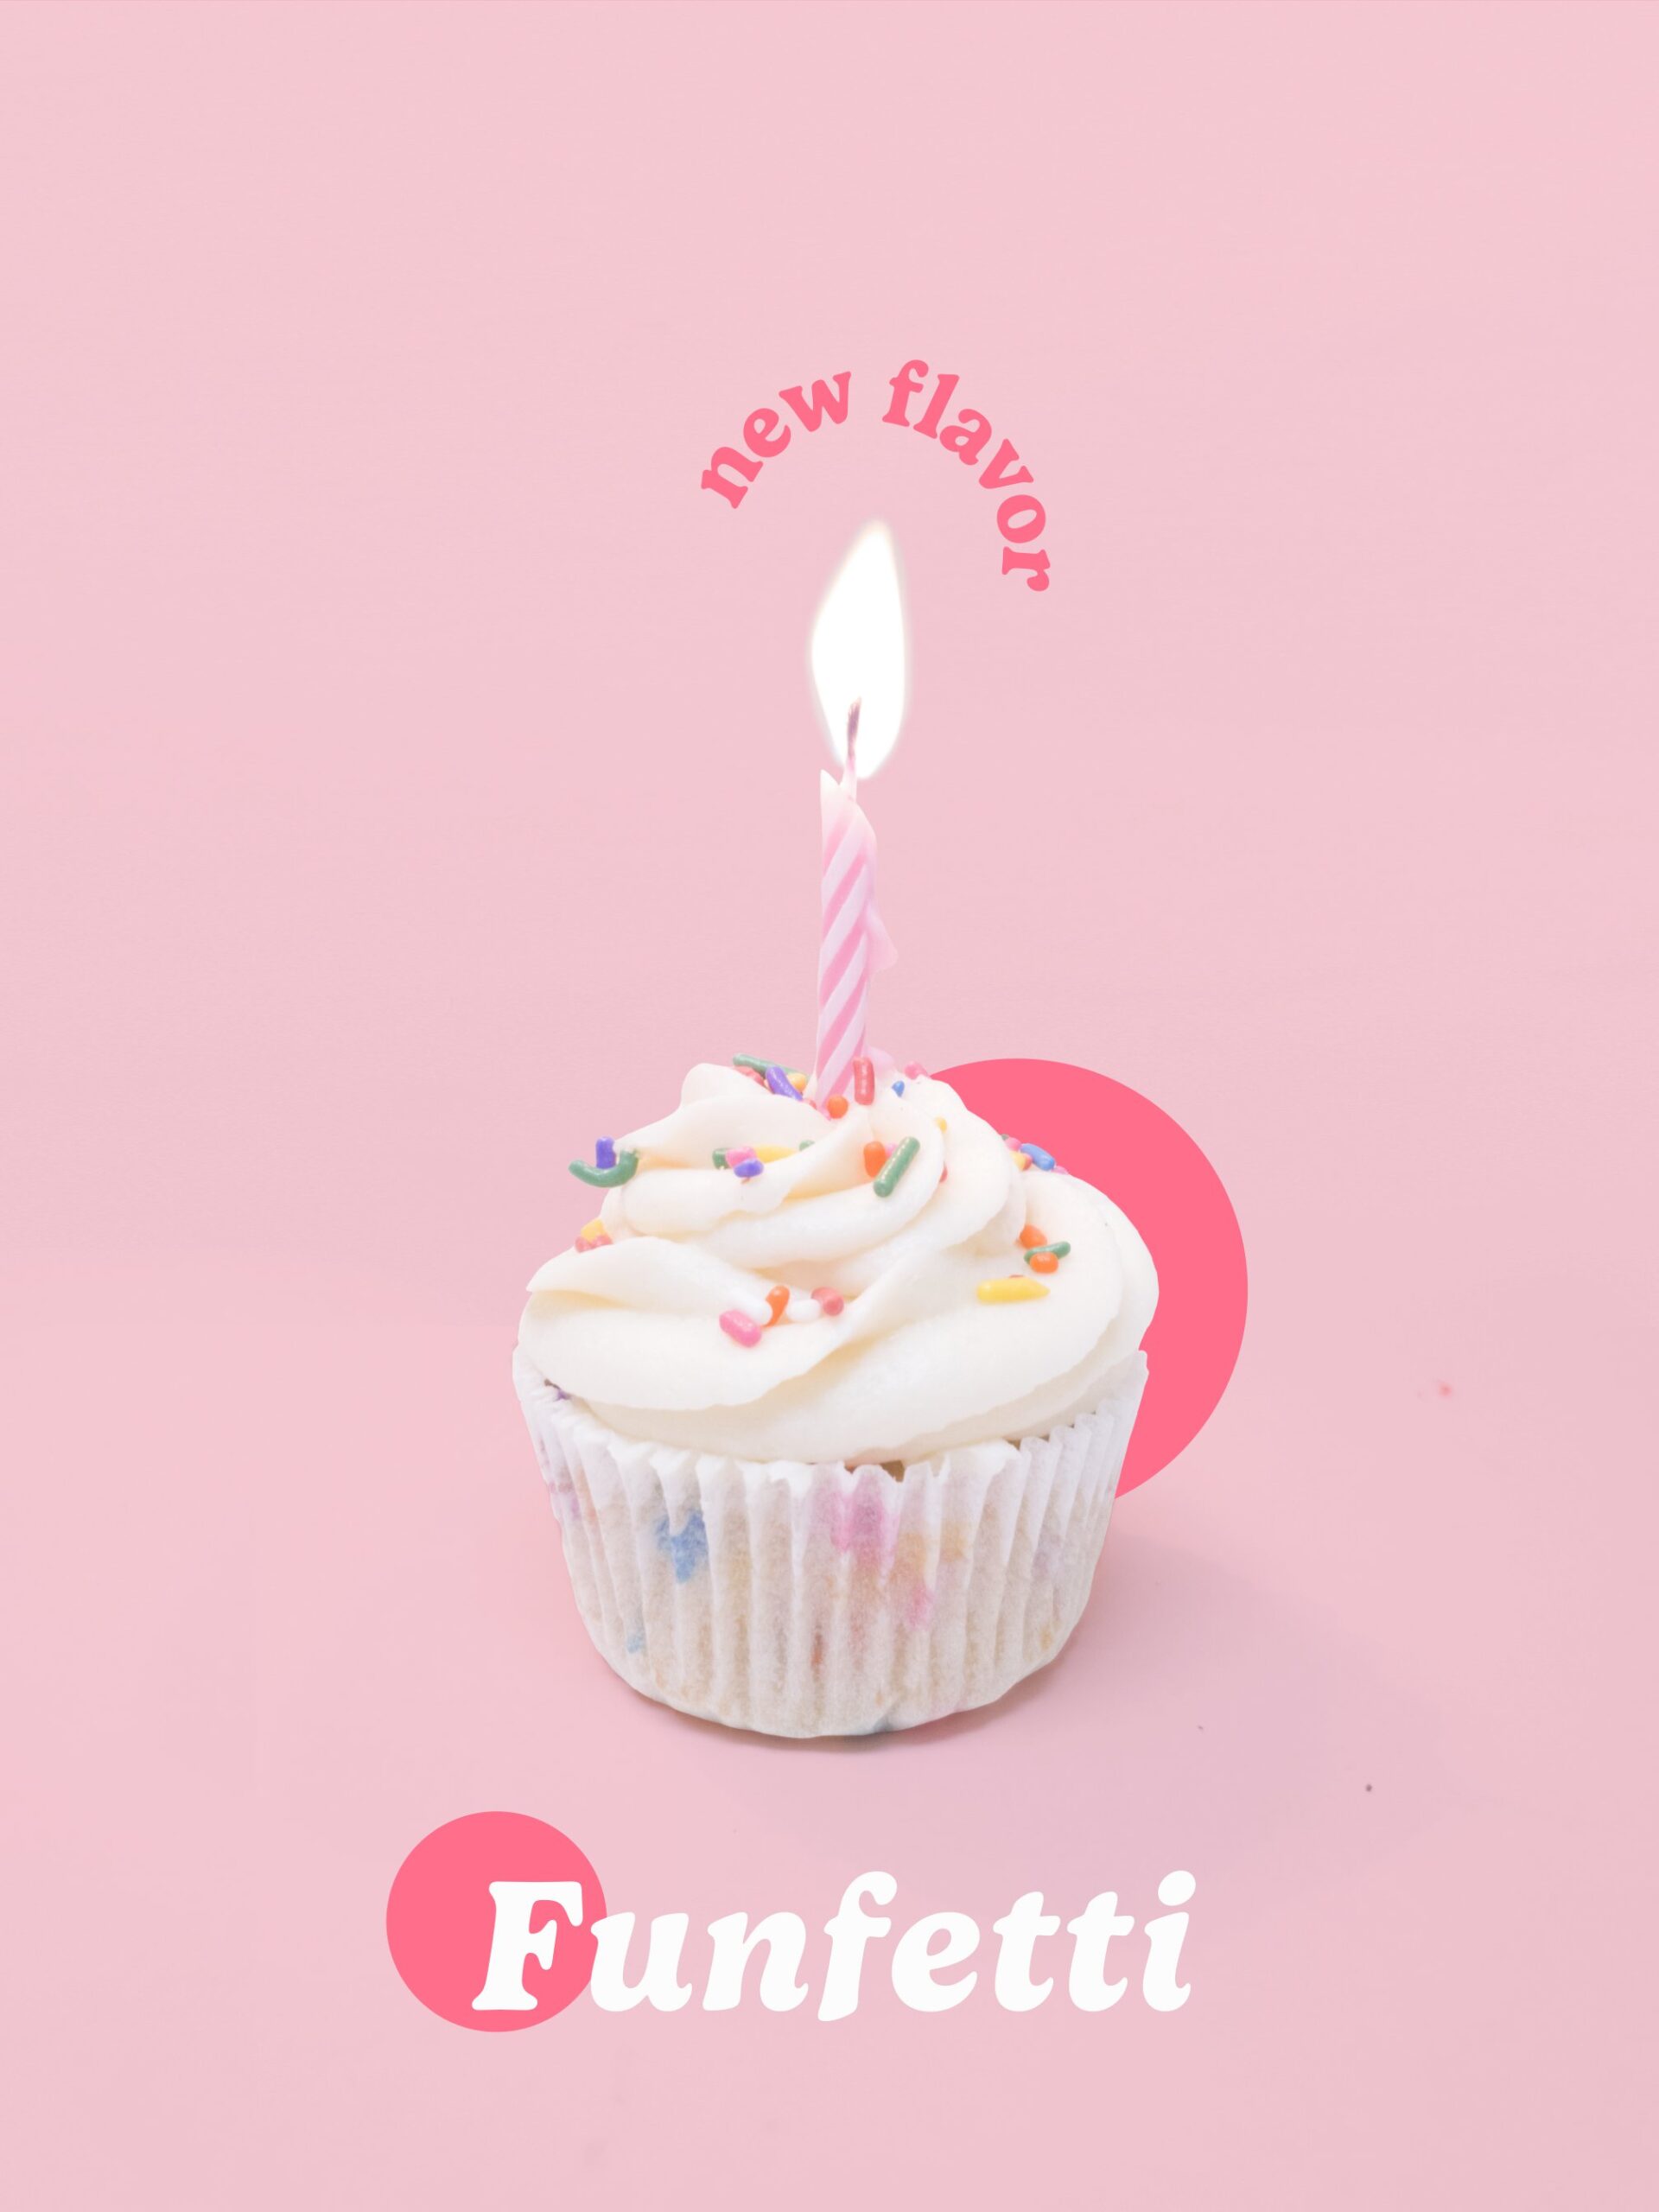 Photograph of a funfetti cupcake with rainbow sprinkles and a lit pink and white striped candle on a light pink background